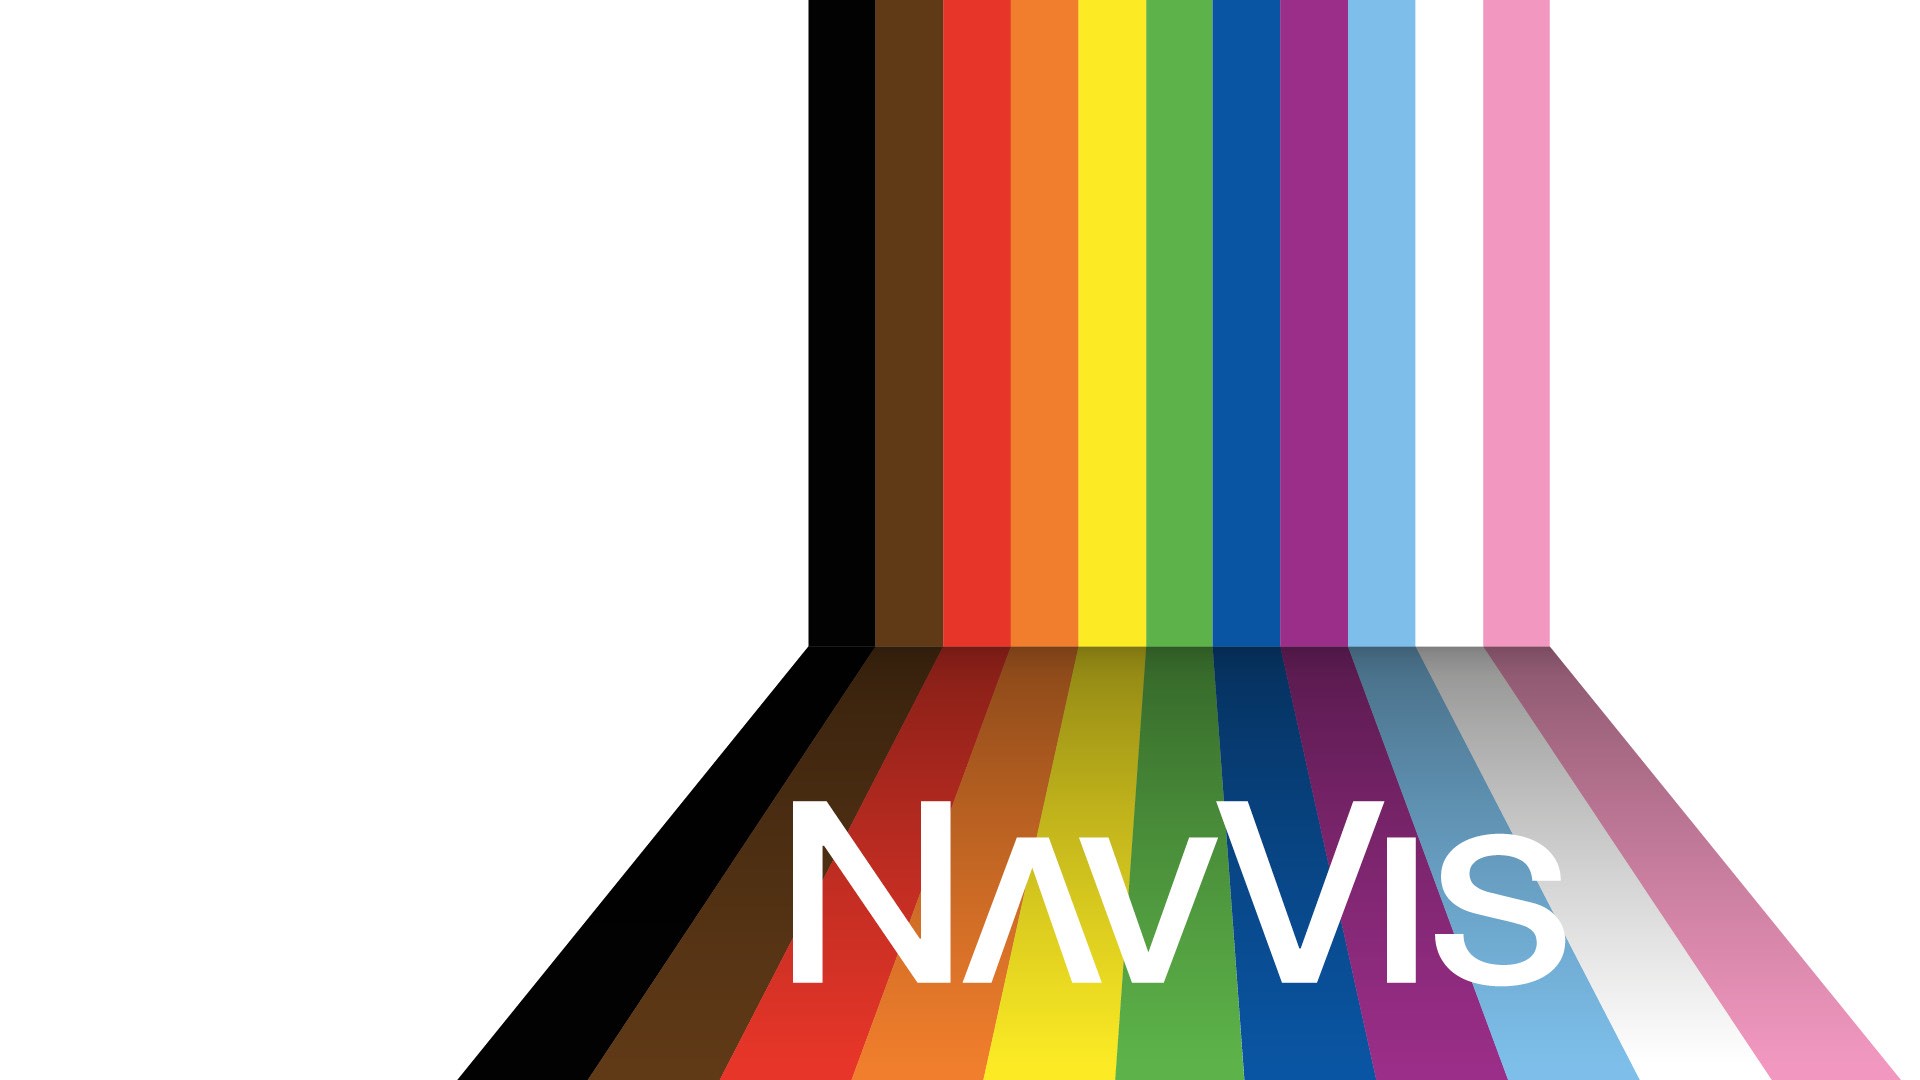 NavVis Proud: Samantha A. on three steps to becoming a better ally